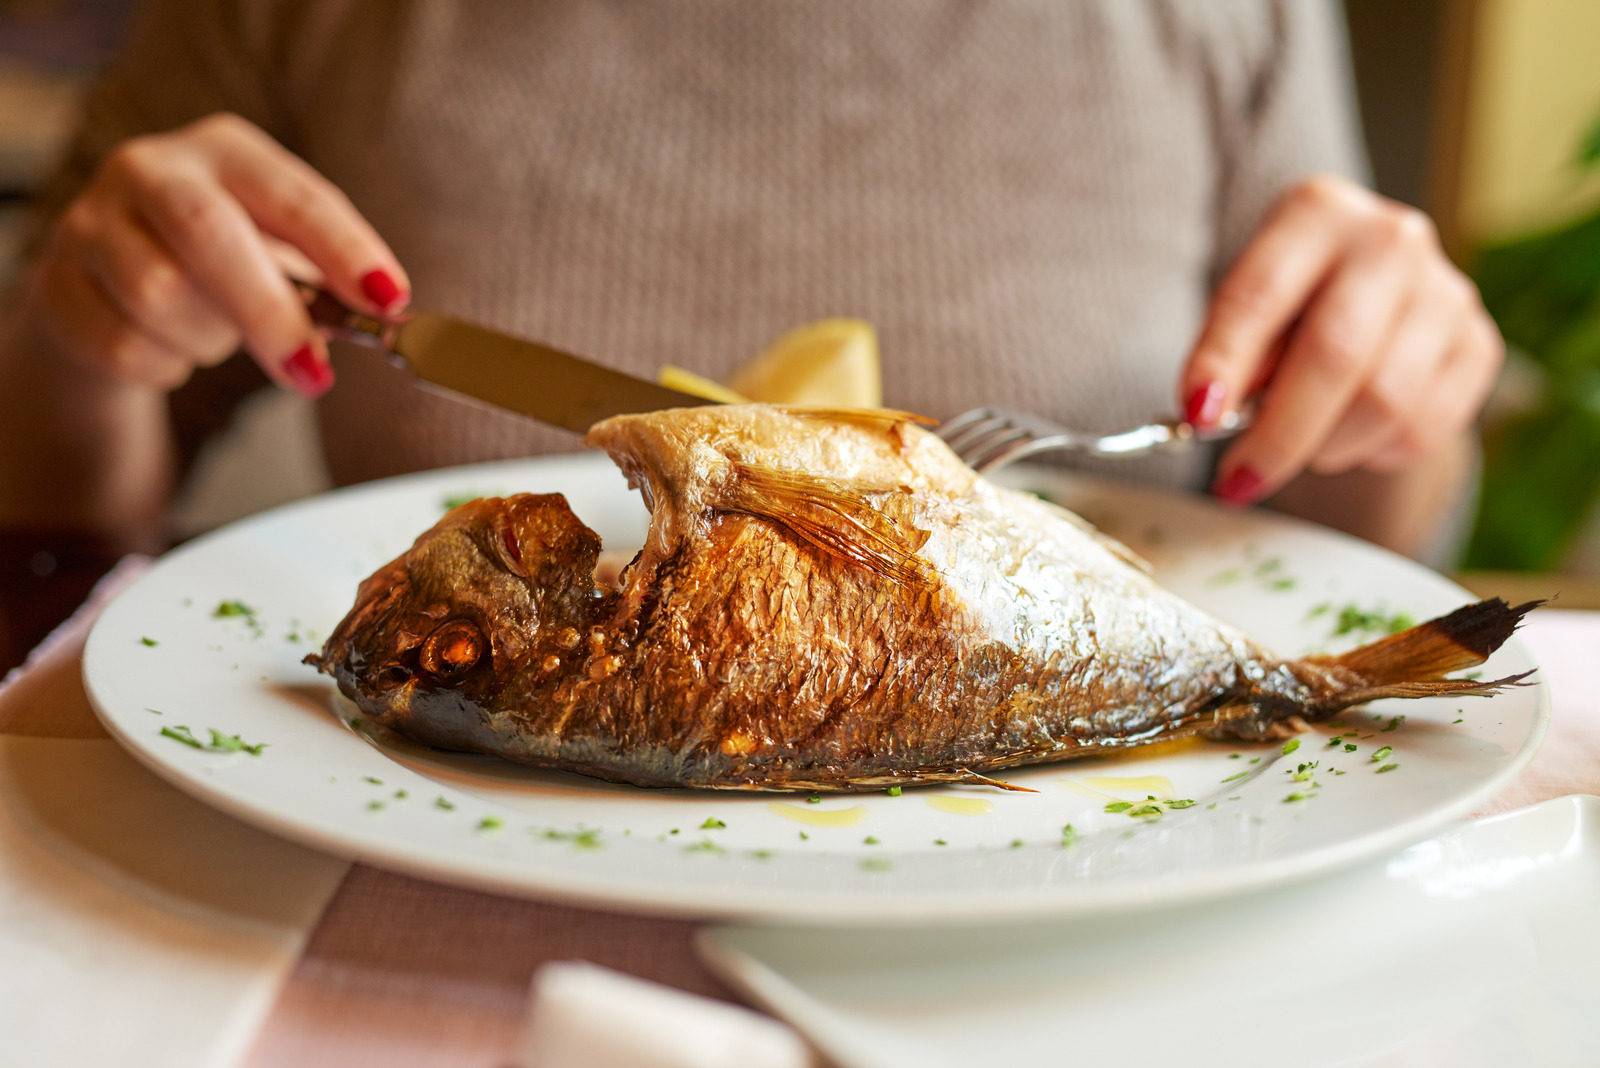 fish in plate, young woman preparing to eat it.lifestyle concept.